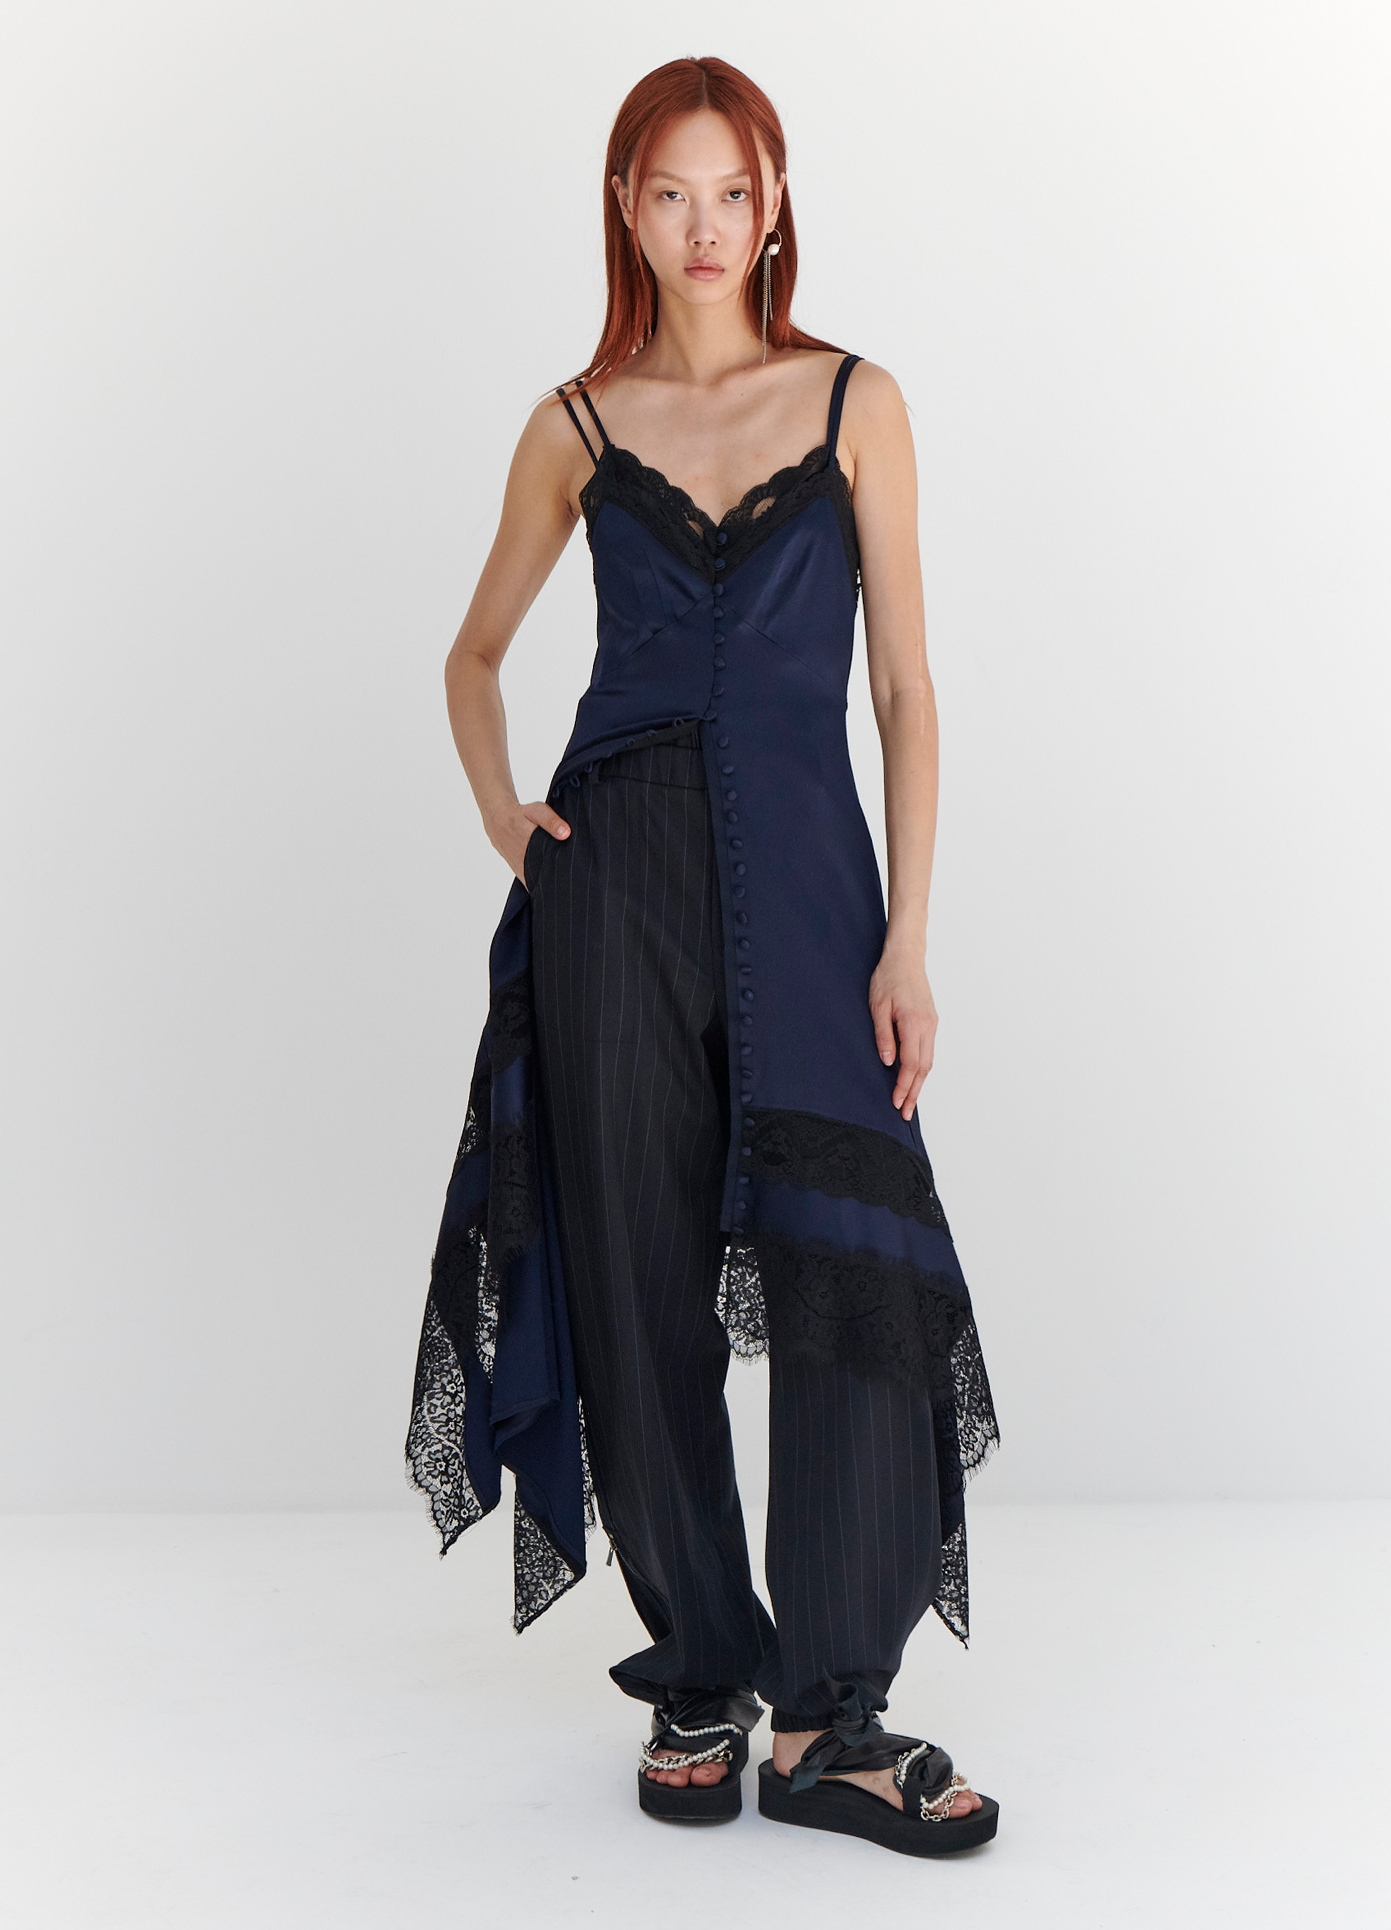 MONSE Lace Trim Slip Dress in Midnight on model with hand in pocket full front view